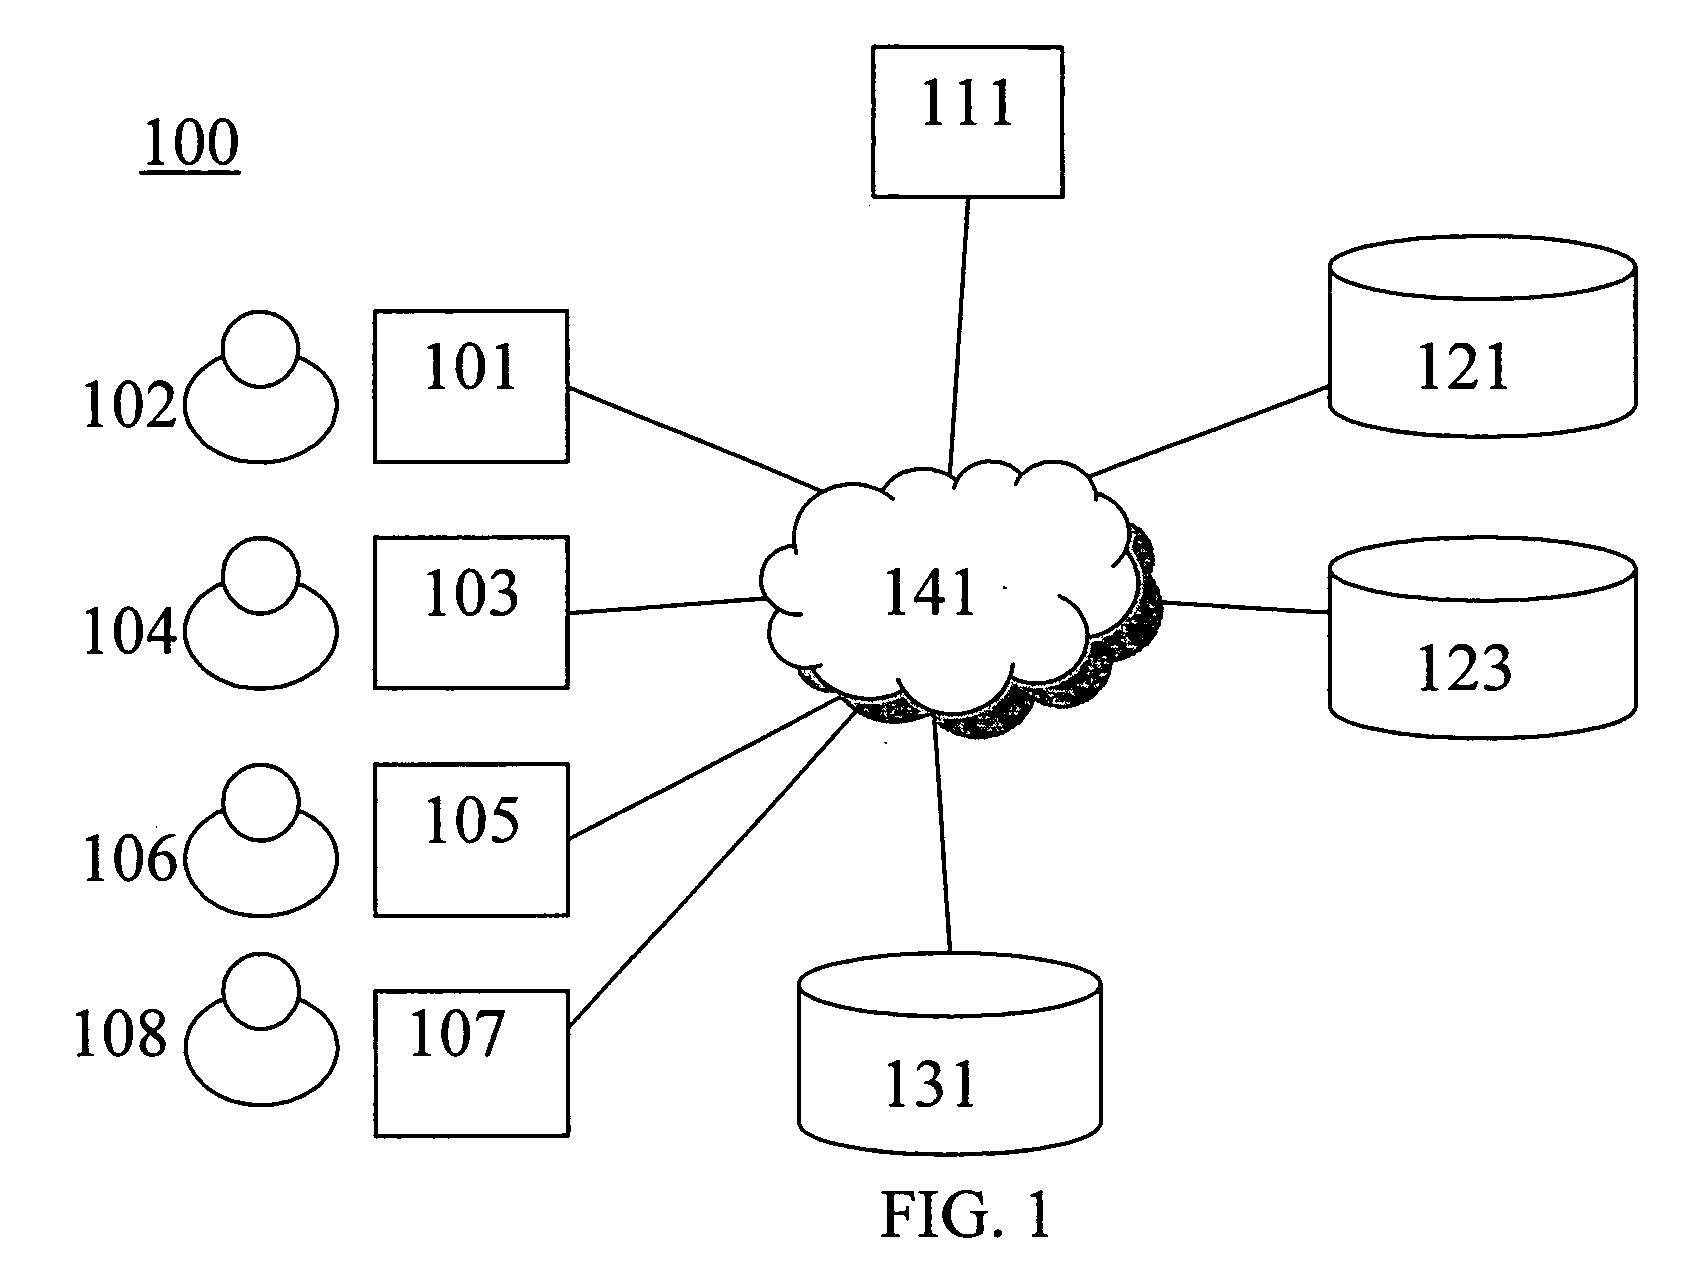 System and Method for Providing Online Education